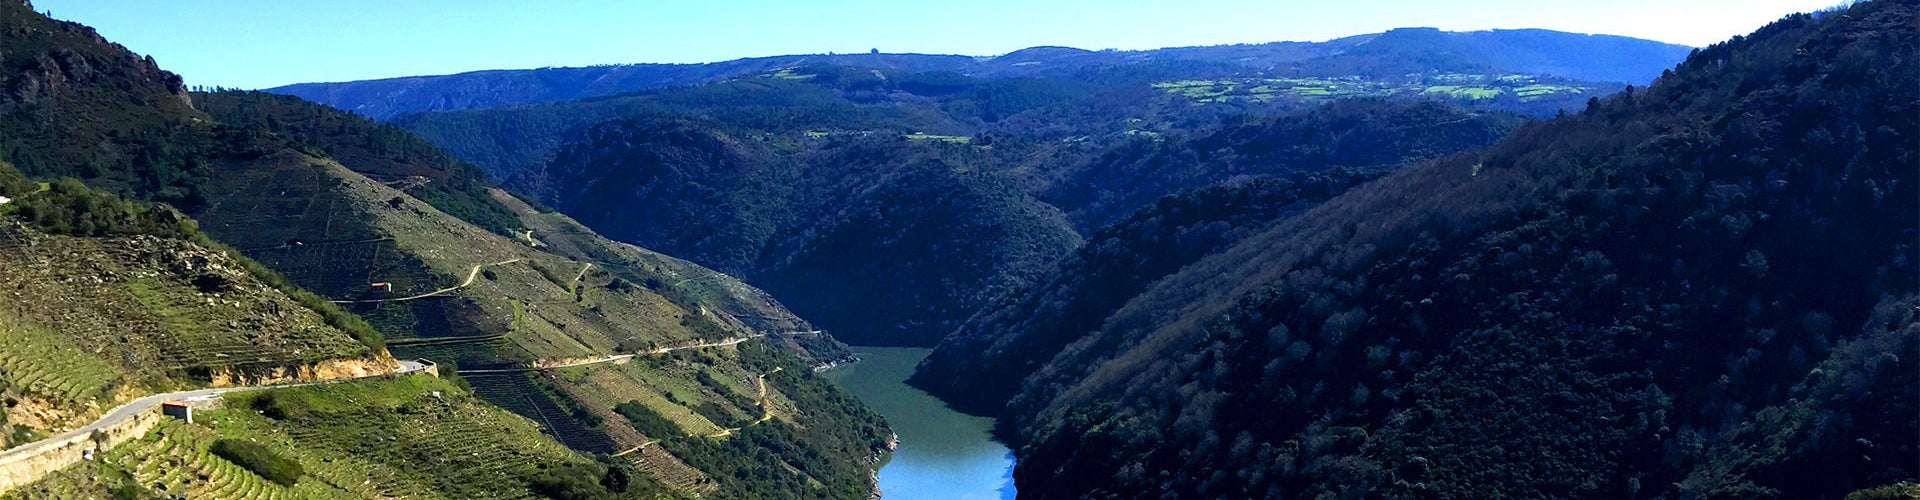 A view of vineyards in the Ribeira Sacra in Spain's Galicia Wine Region